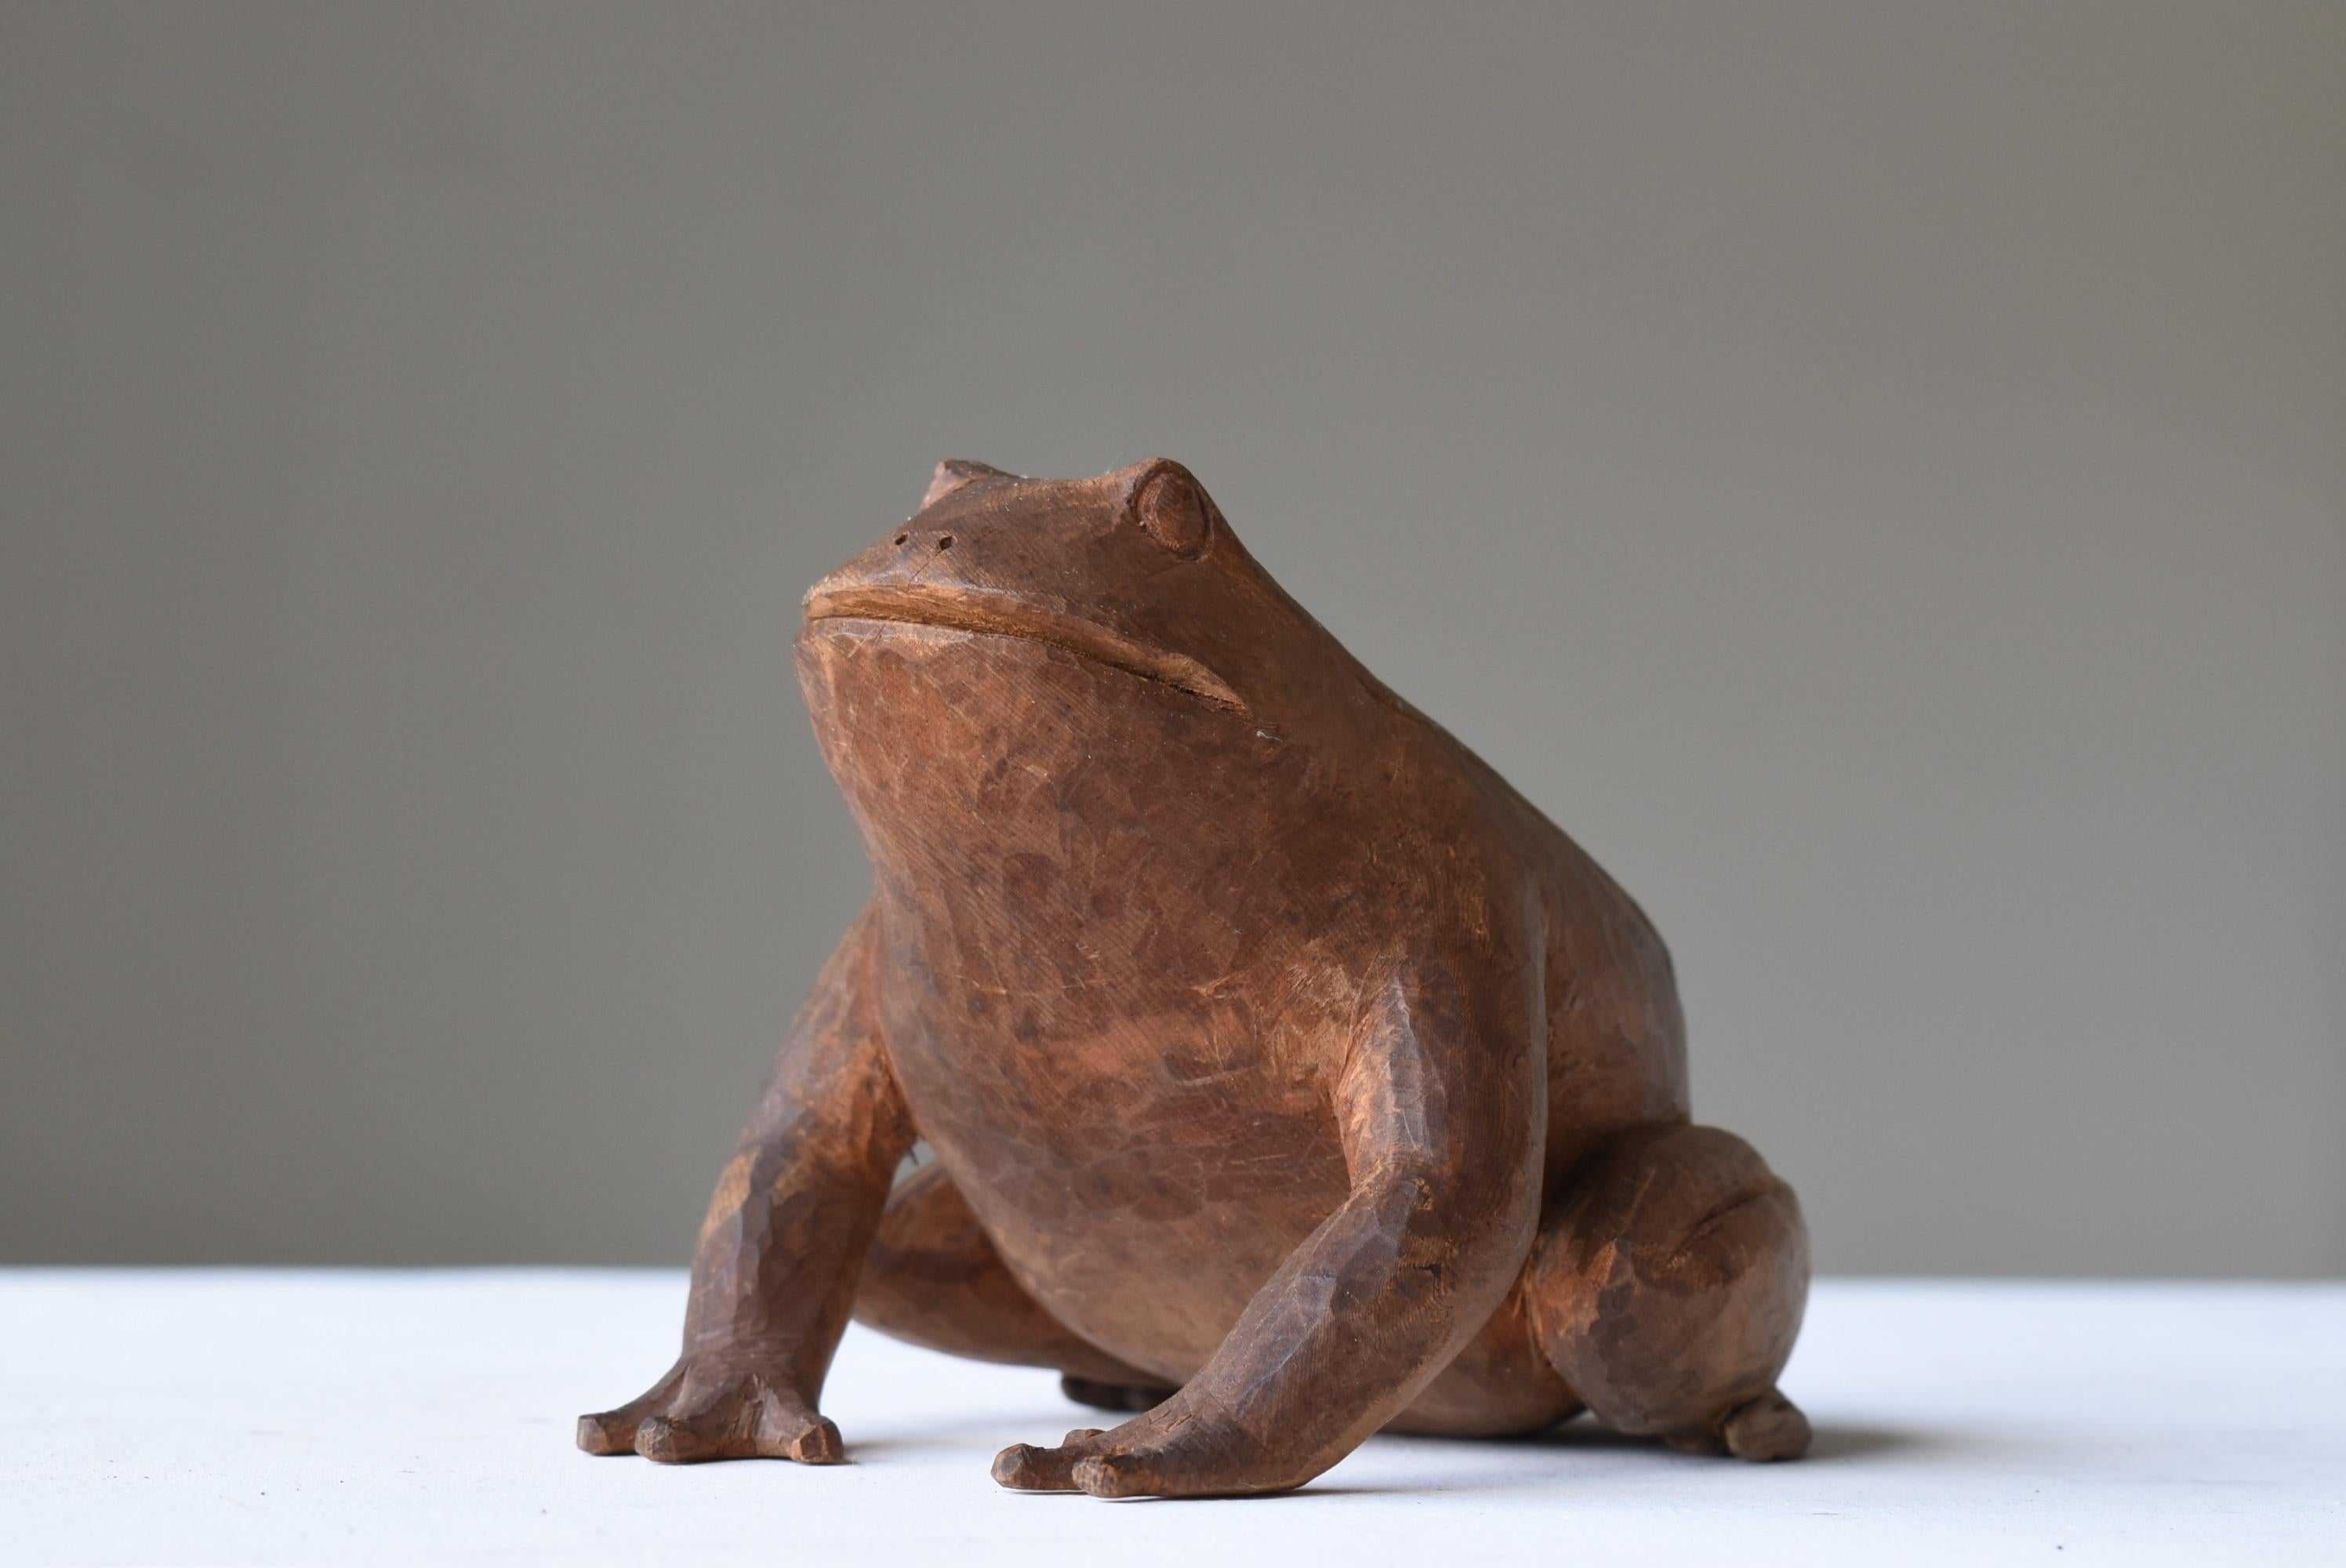 This is an old Japanese wood carving of a frog.
This item is from the Meiji era. (1860s to 1920s).
It is made of cedar wood.

In Japan, frogs are considered to be good luck charms.
This one seems to have been worshipped as a guardian